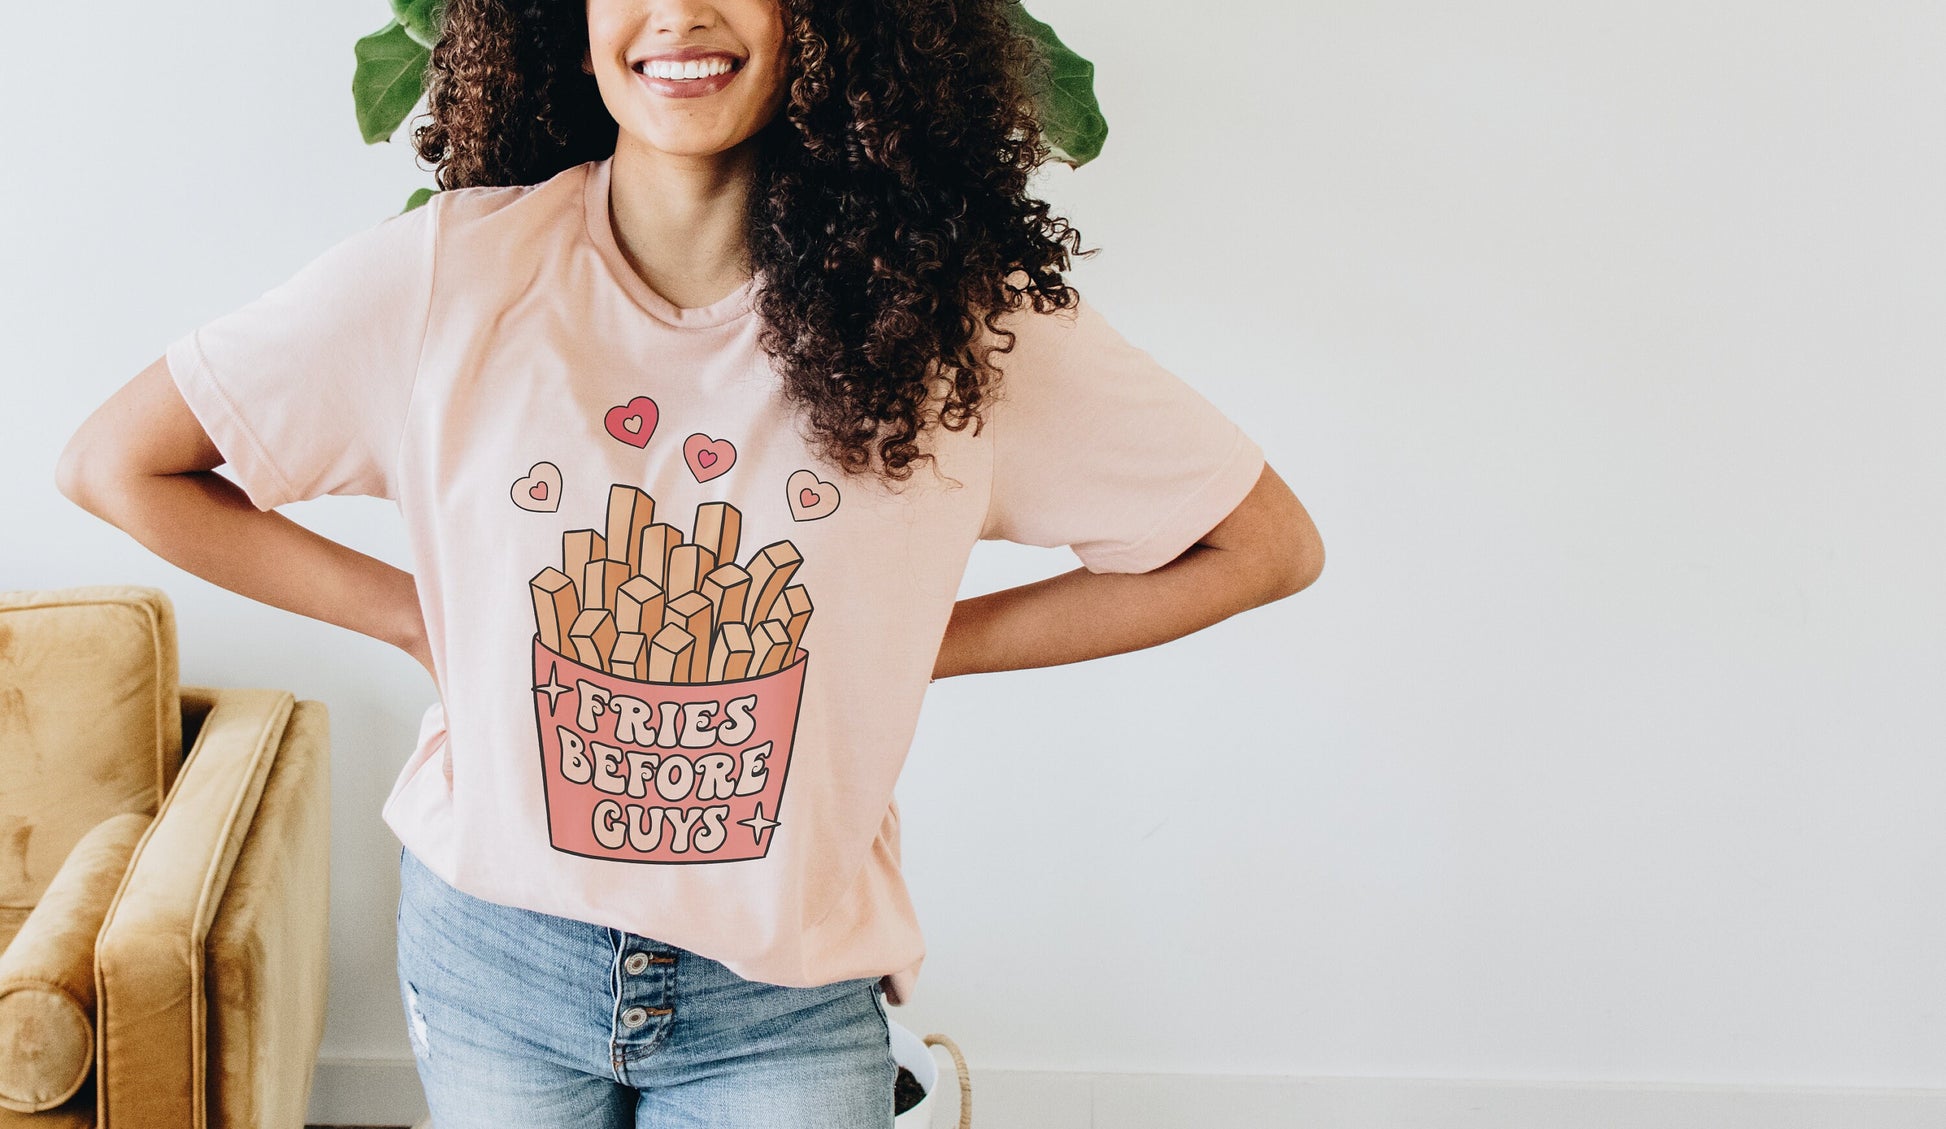 Fries Before Guys Shirt - Valentines Day Shirt for Women - Stick'em Up Baby®